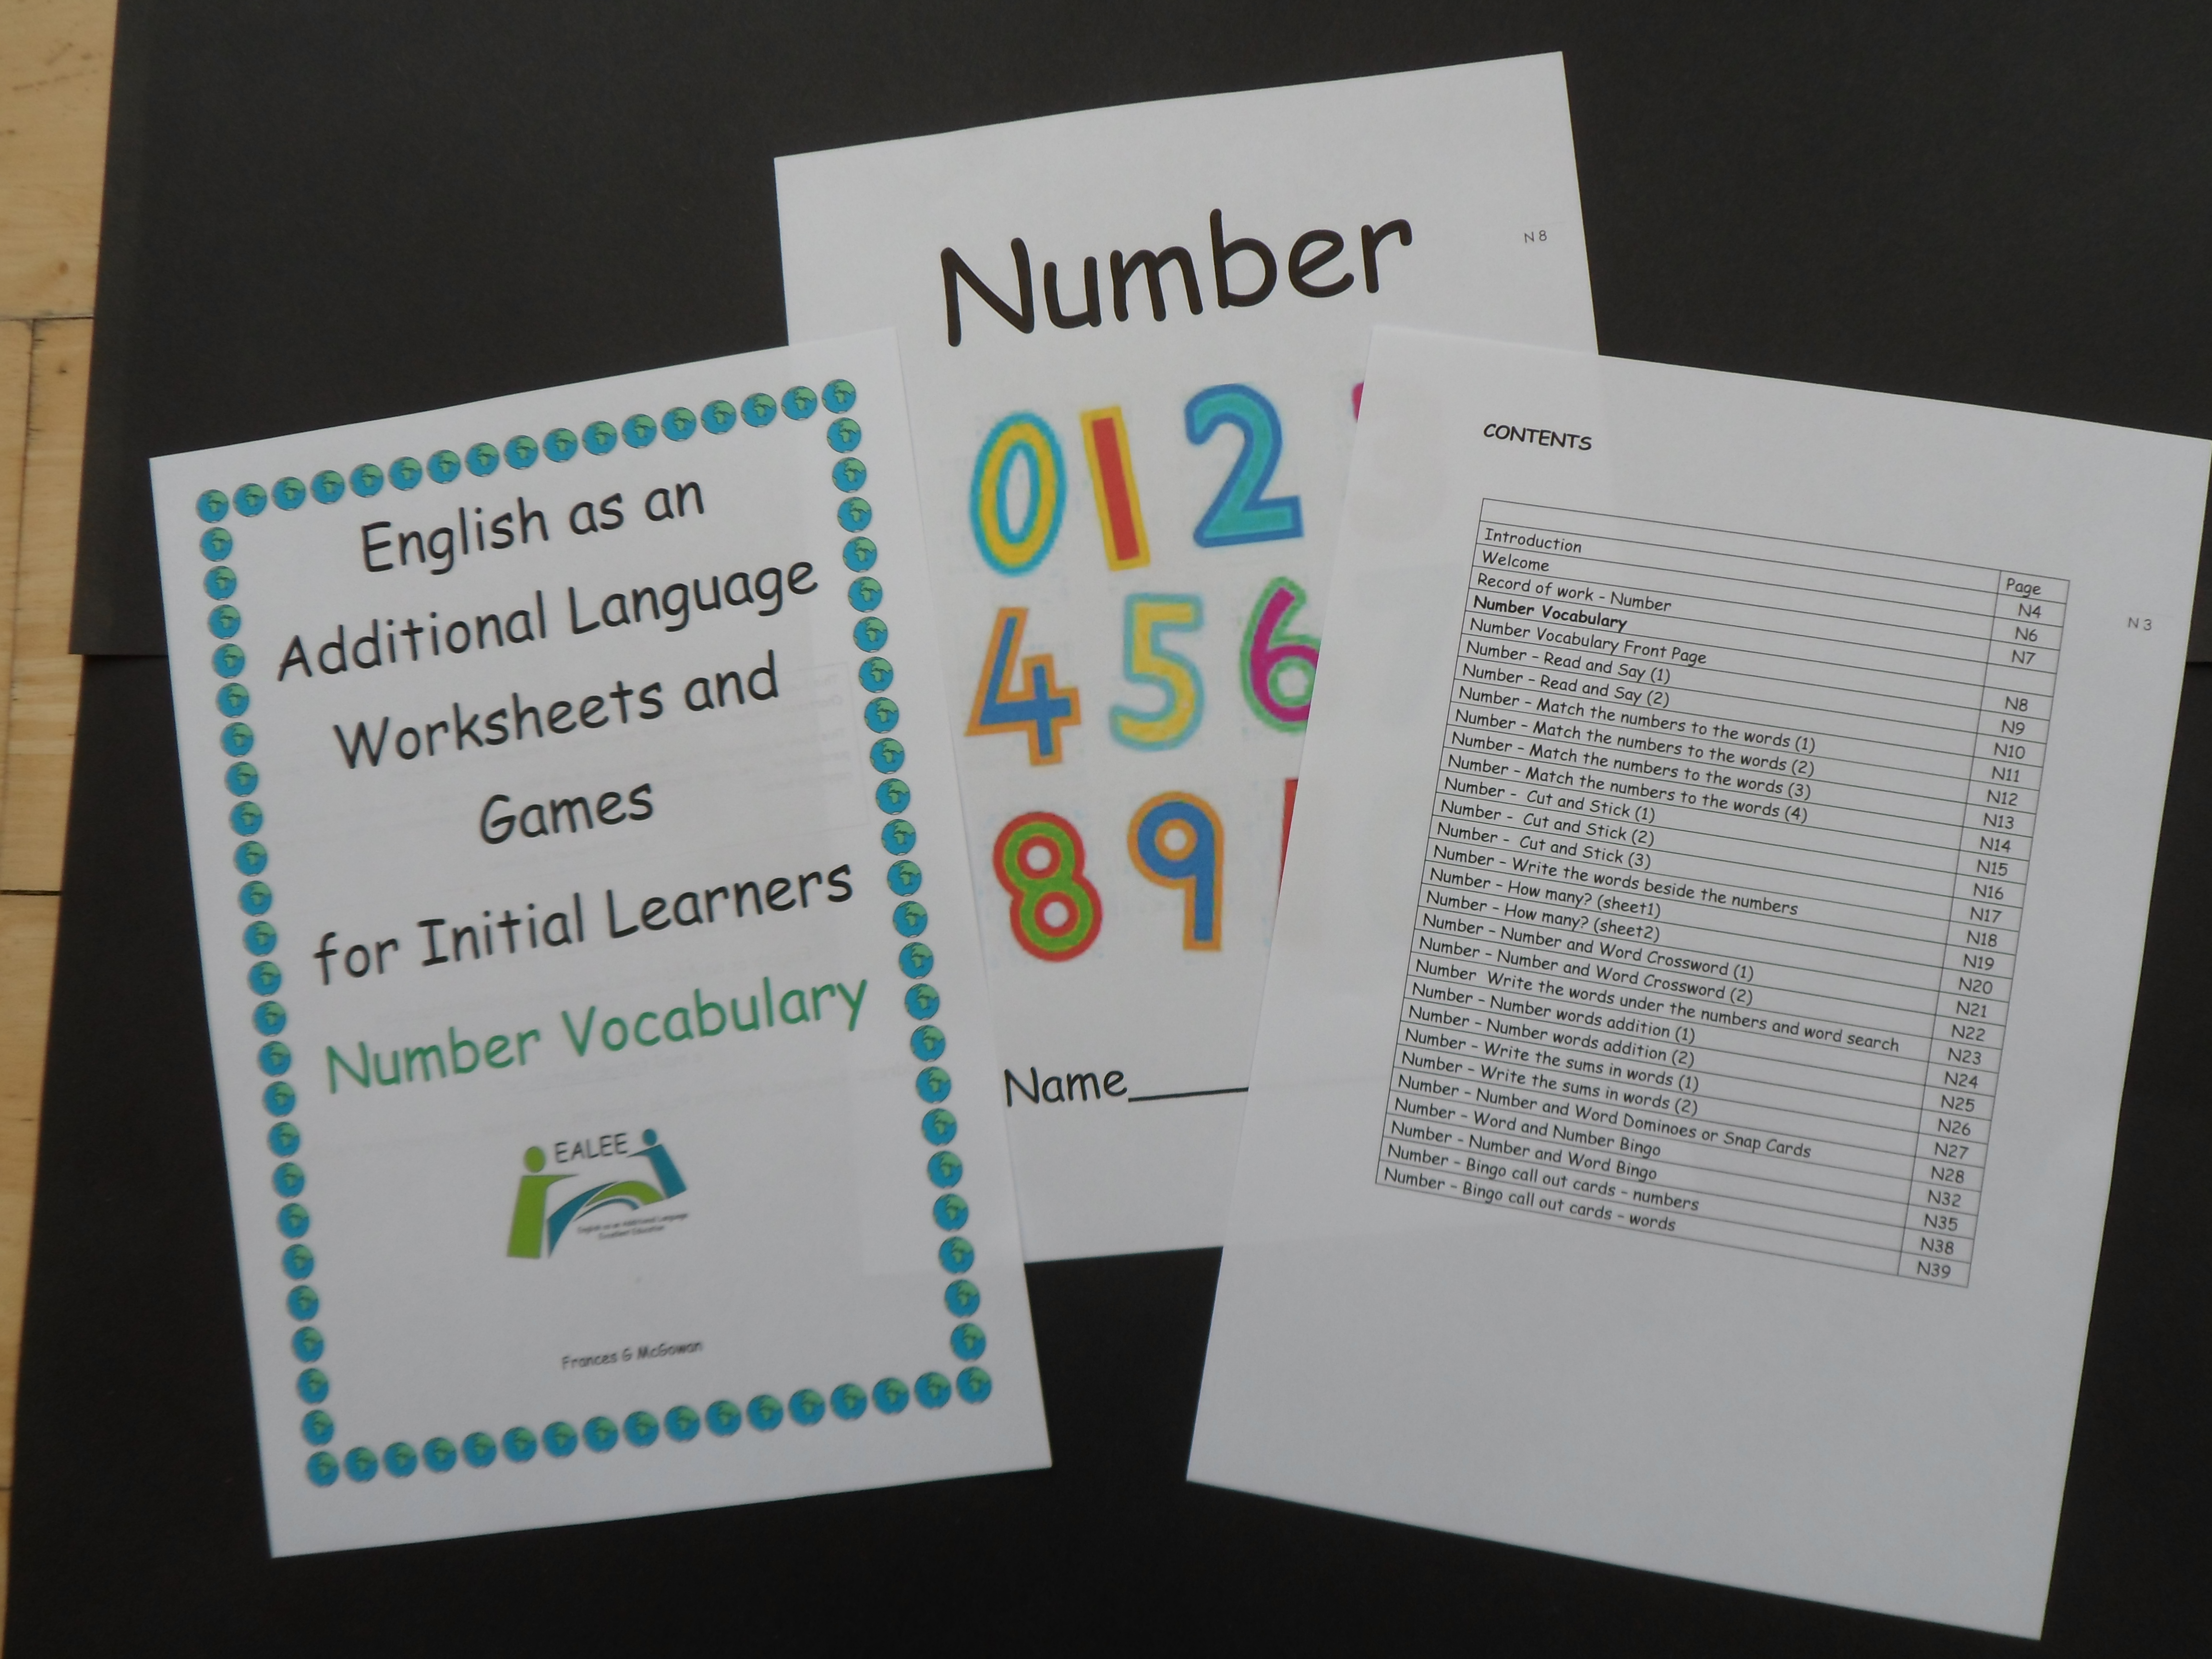 EAL/ESL Worksheets and Games for Initial Learners Number Vocabulary